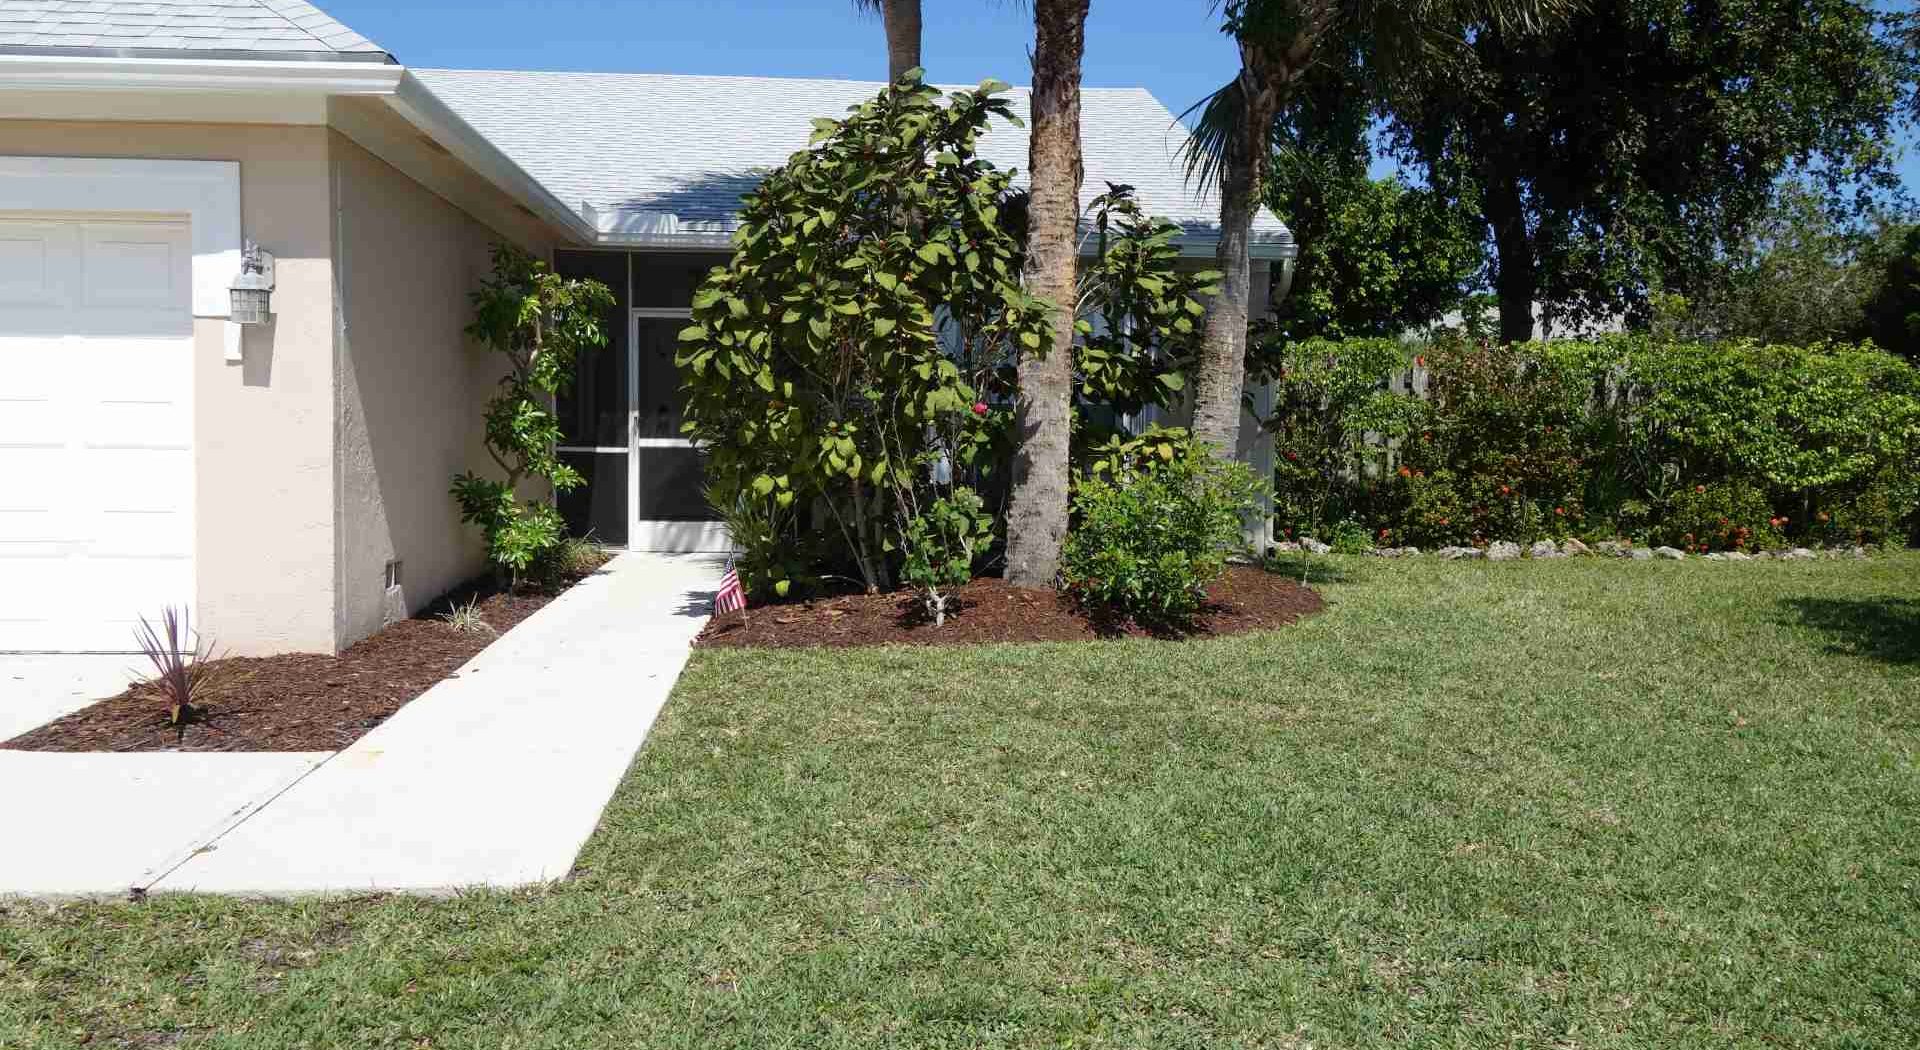 How Can You Improve Your Front Yard Landscaping?